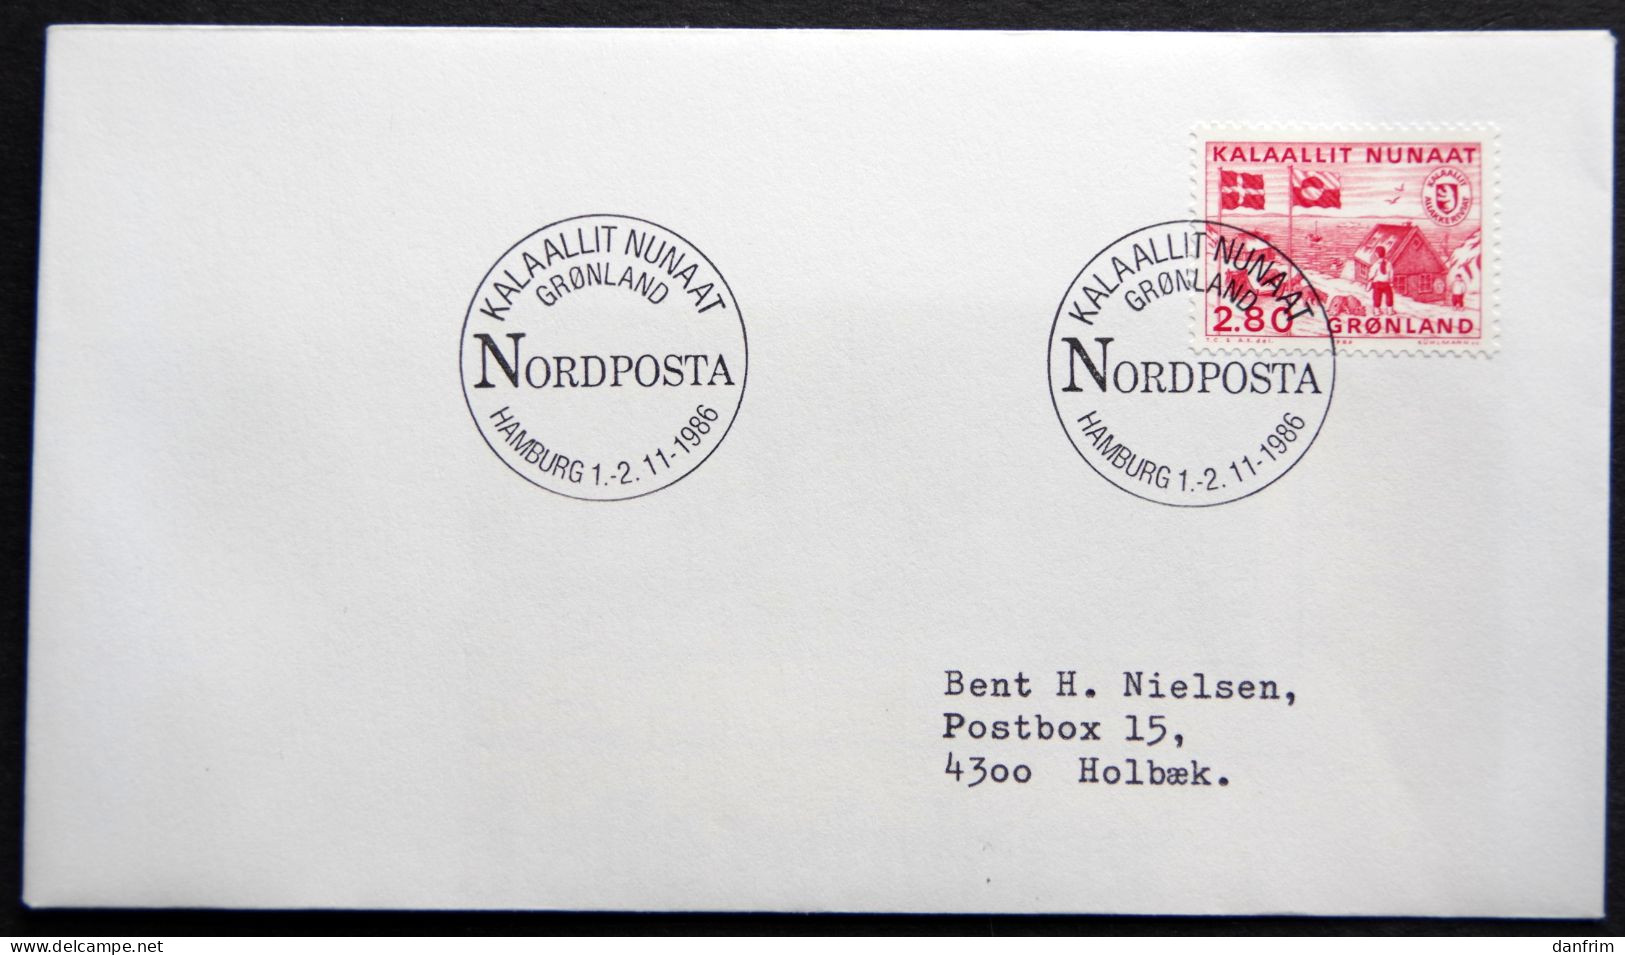 Greenland 1986 SPECIAL POSTMARKS. NORDPOSTA HAMBURG  1-2-11 1986( Lot 886) - Covers & Documents